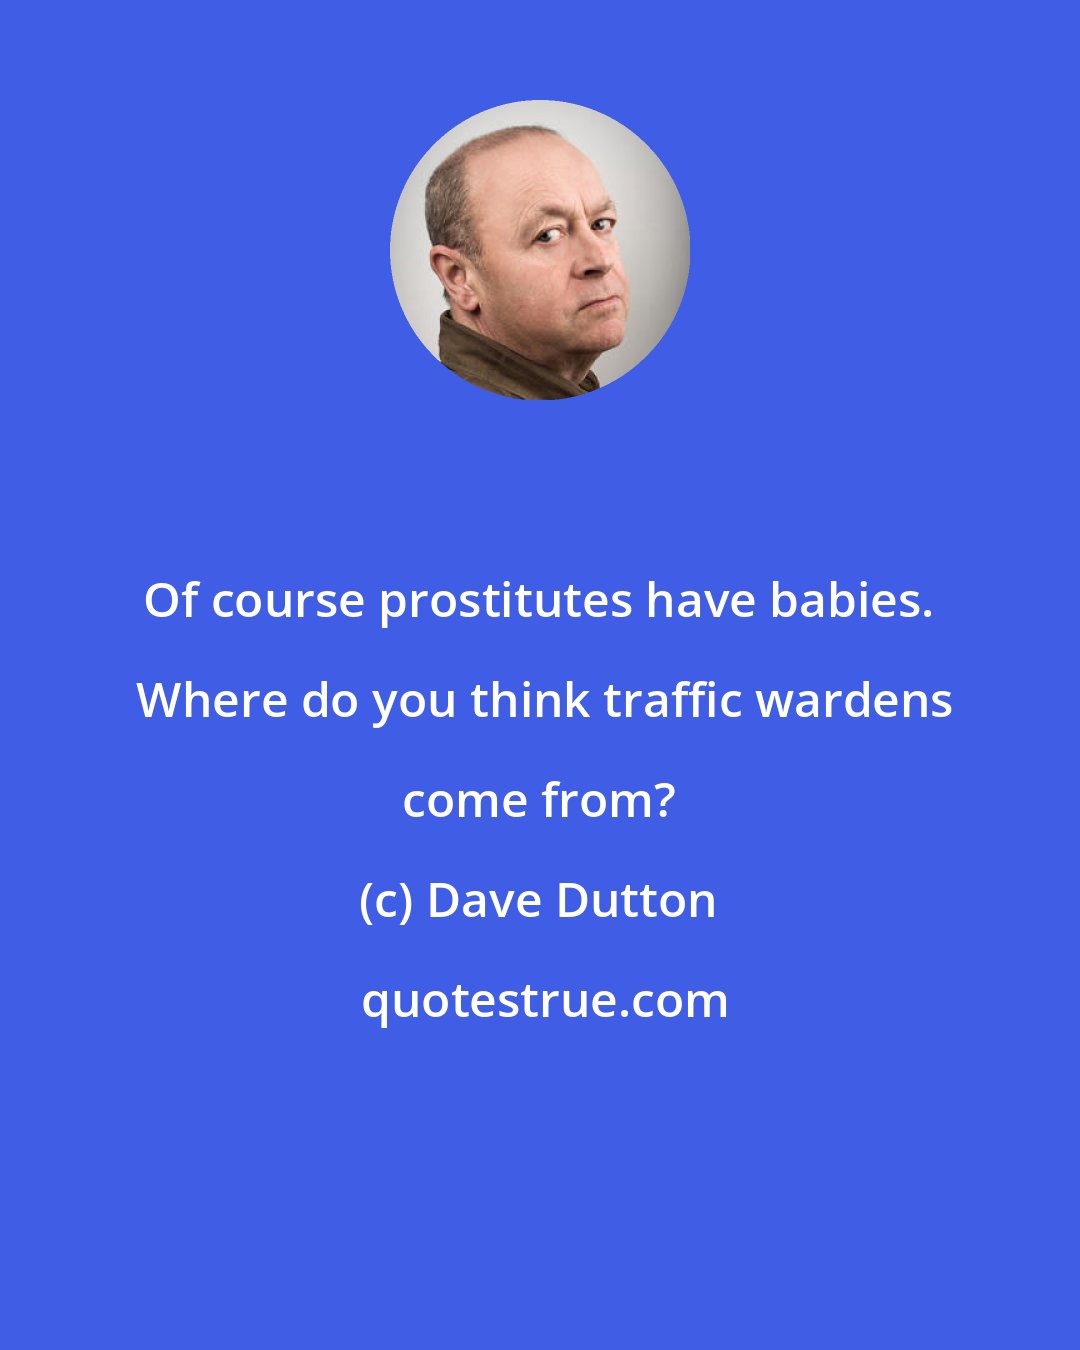 Dave Dutton: Of course prostitutes have babies.  Where do you think traffic wardens come from?